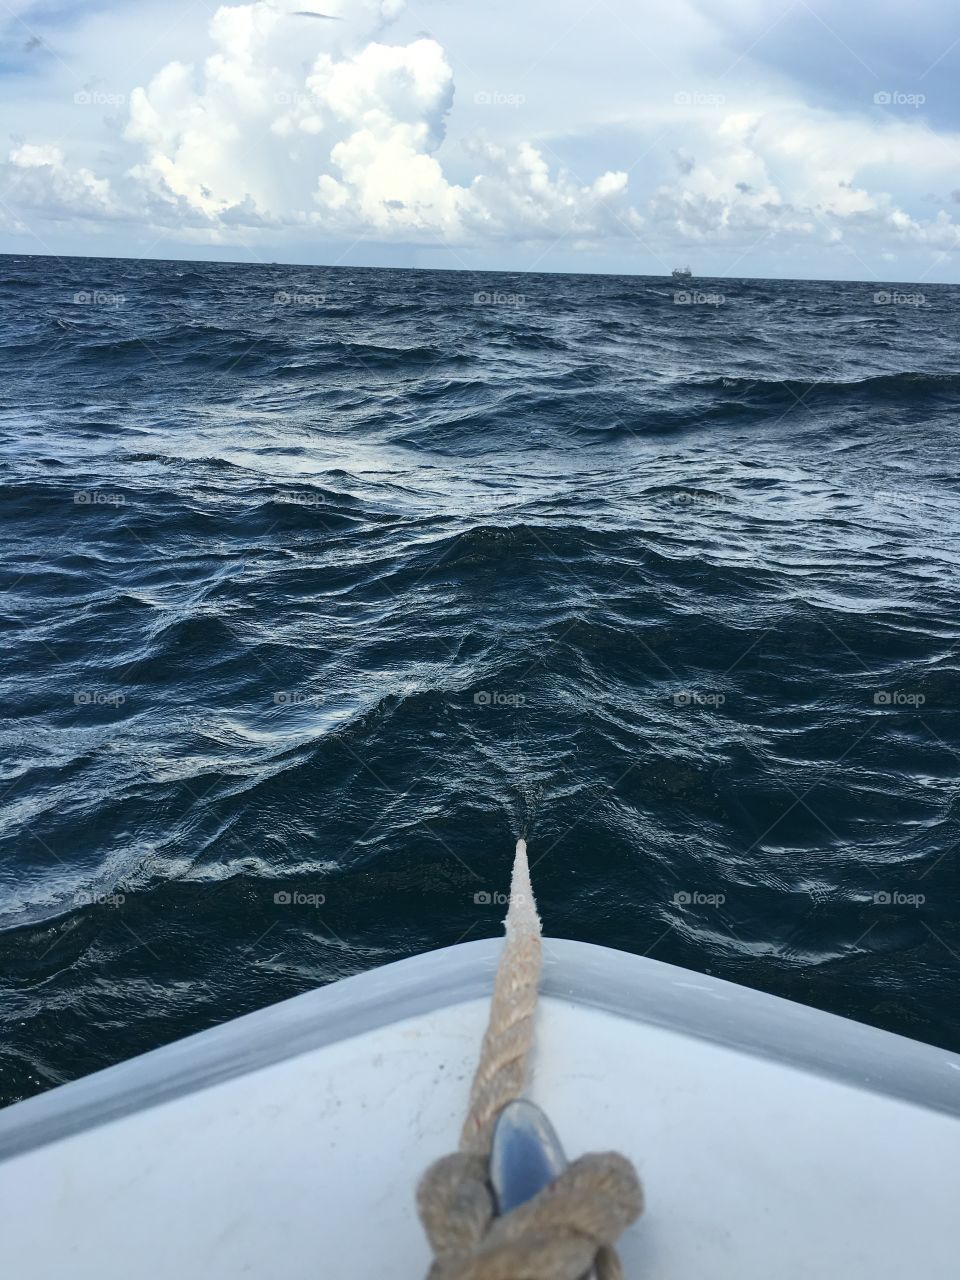 Down the anchor line 